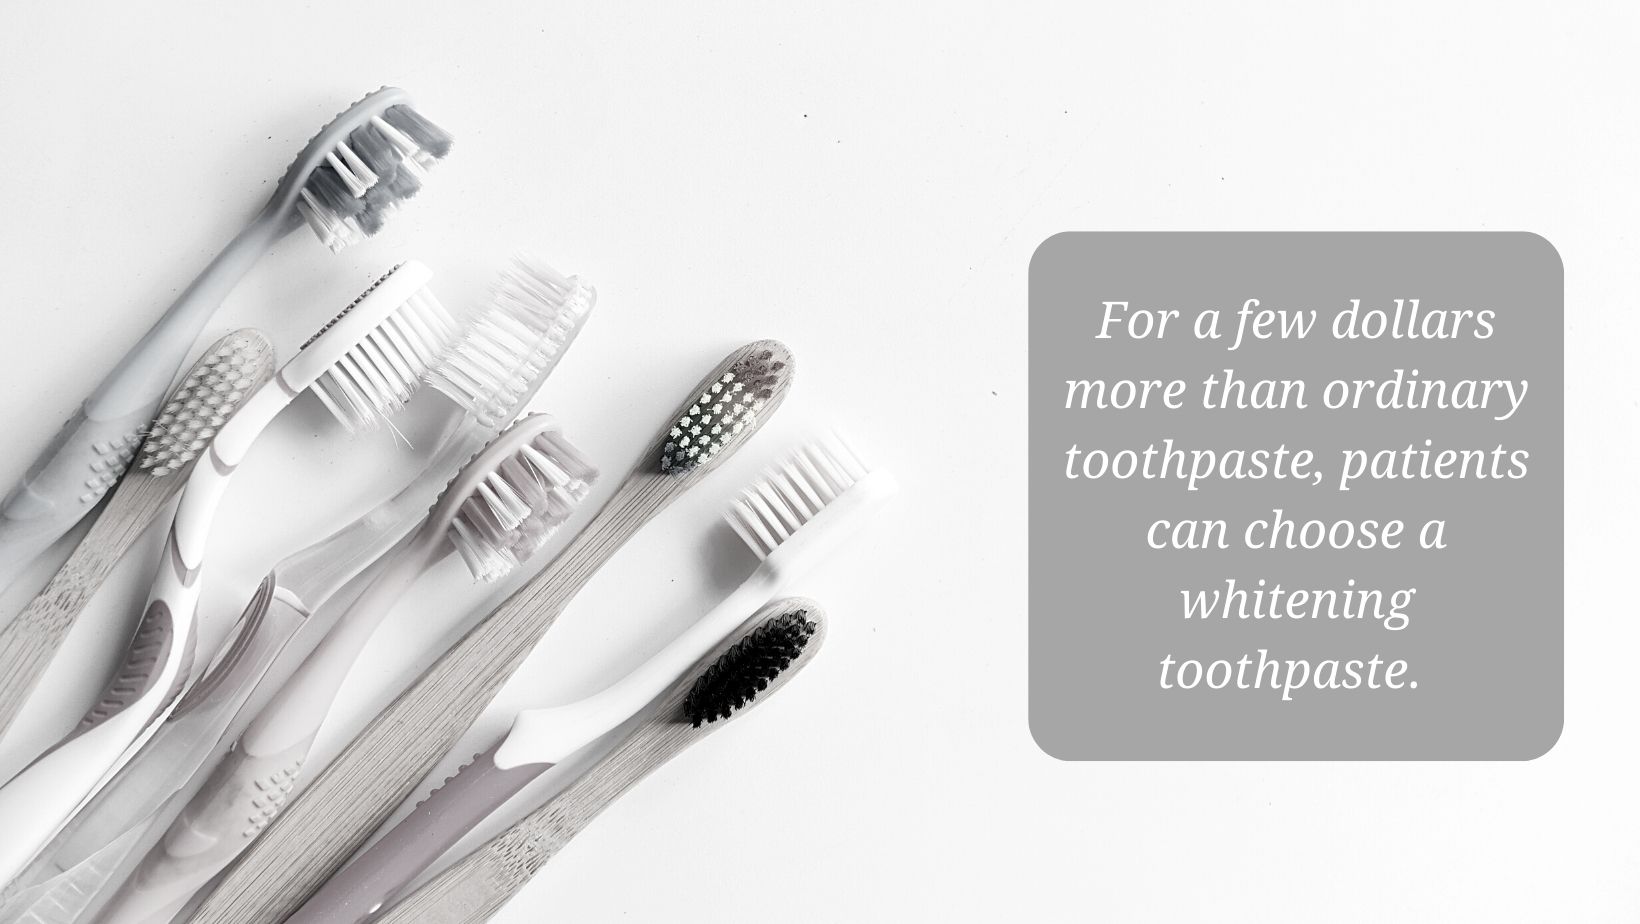 Toothbrushes ready for use with whitening toothpaste